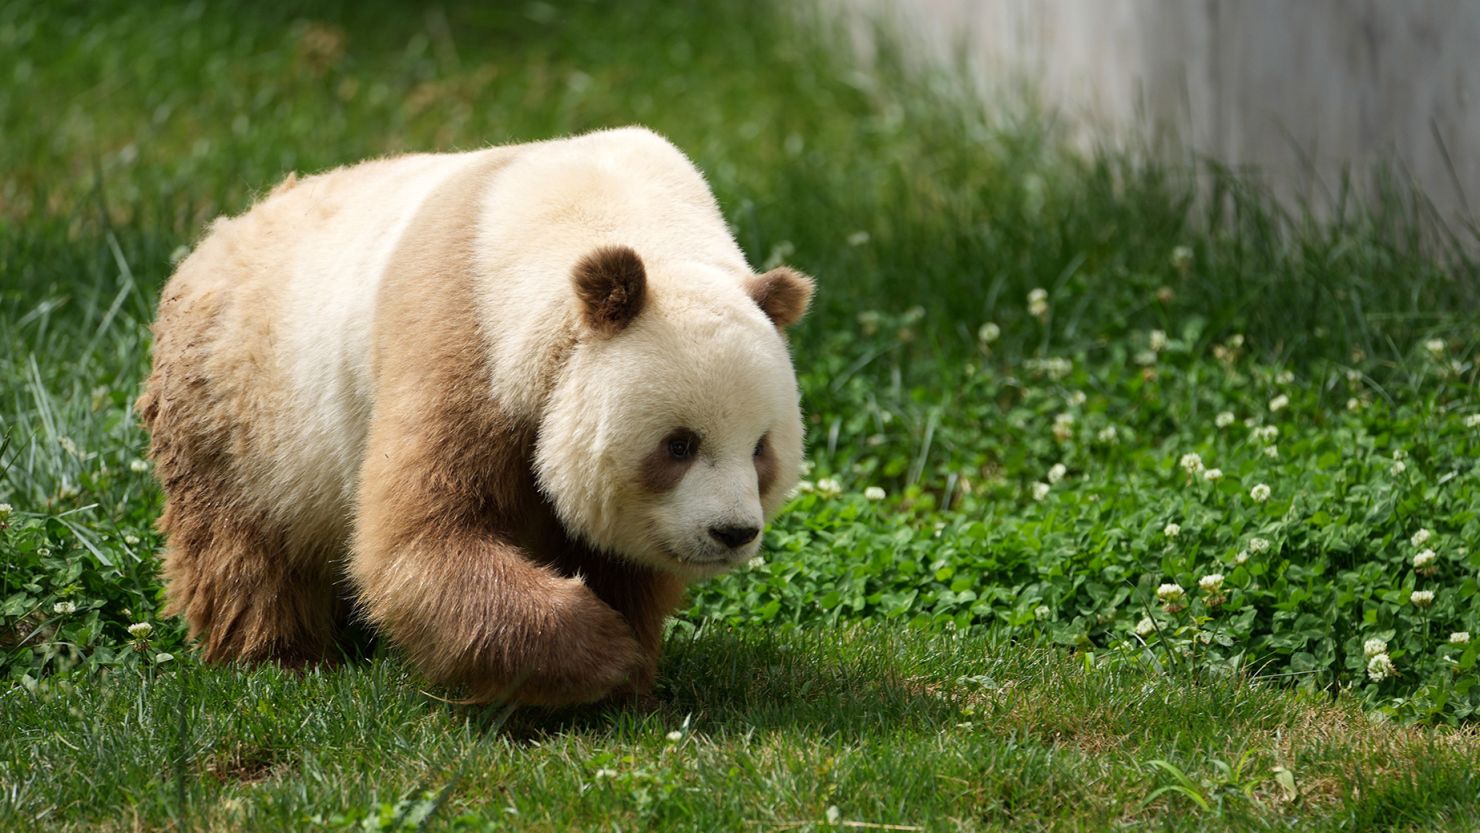 Qizai, a brown giant panda in captivity who was at the center of the scientific study, is seen on May 28, 2021.